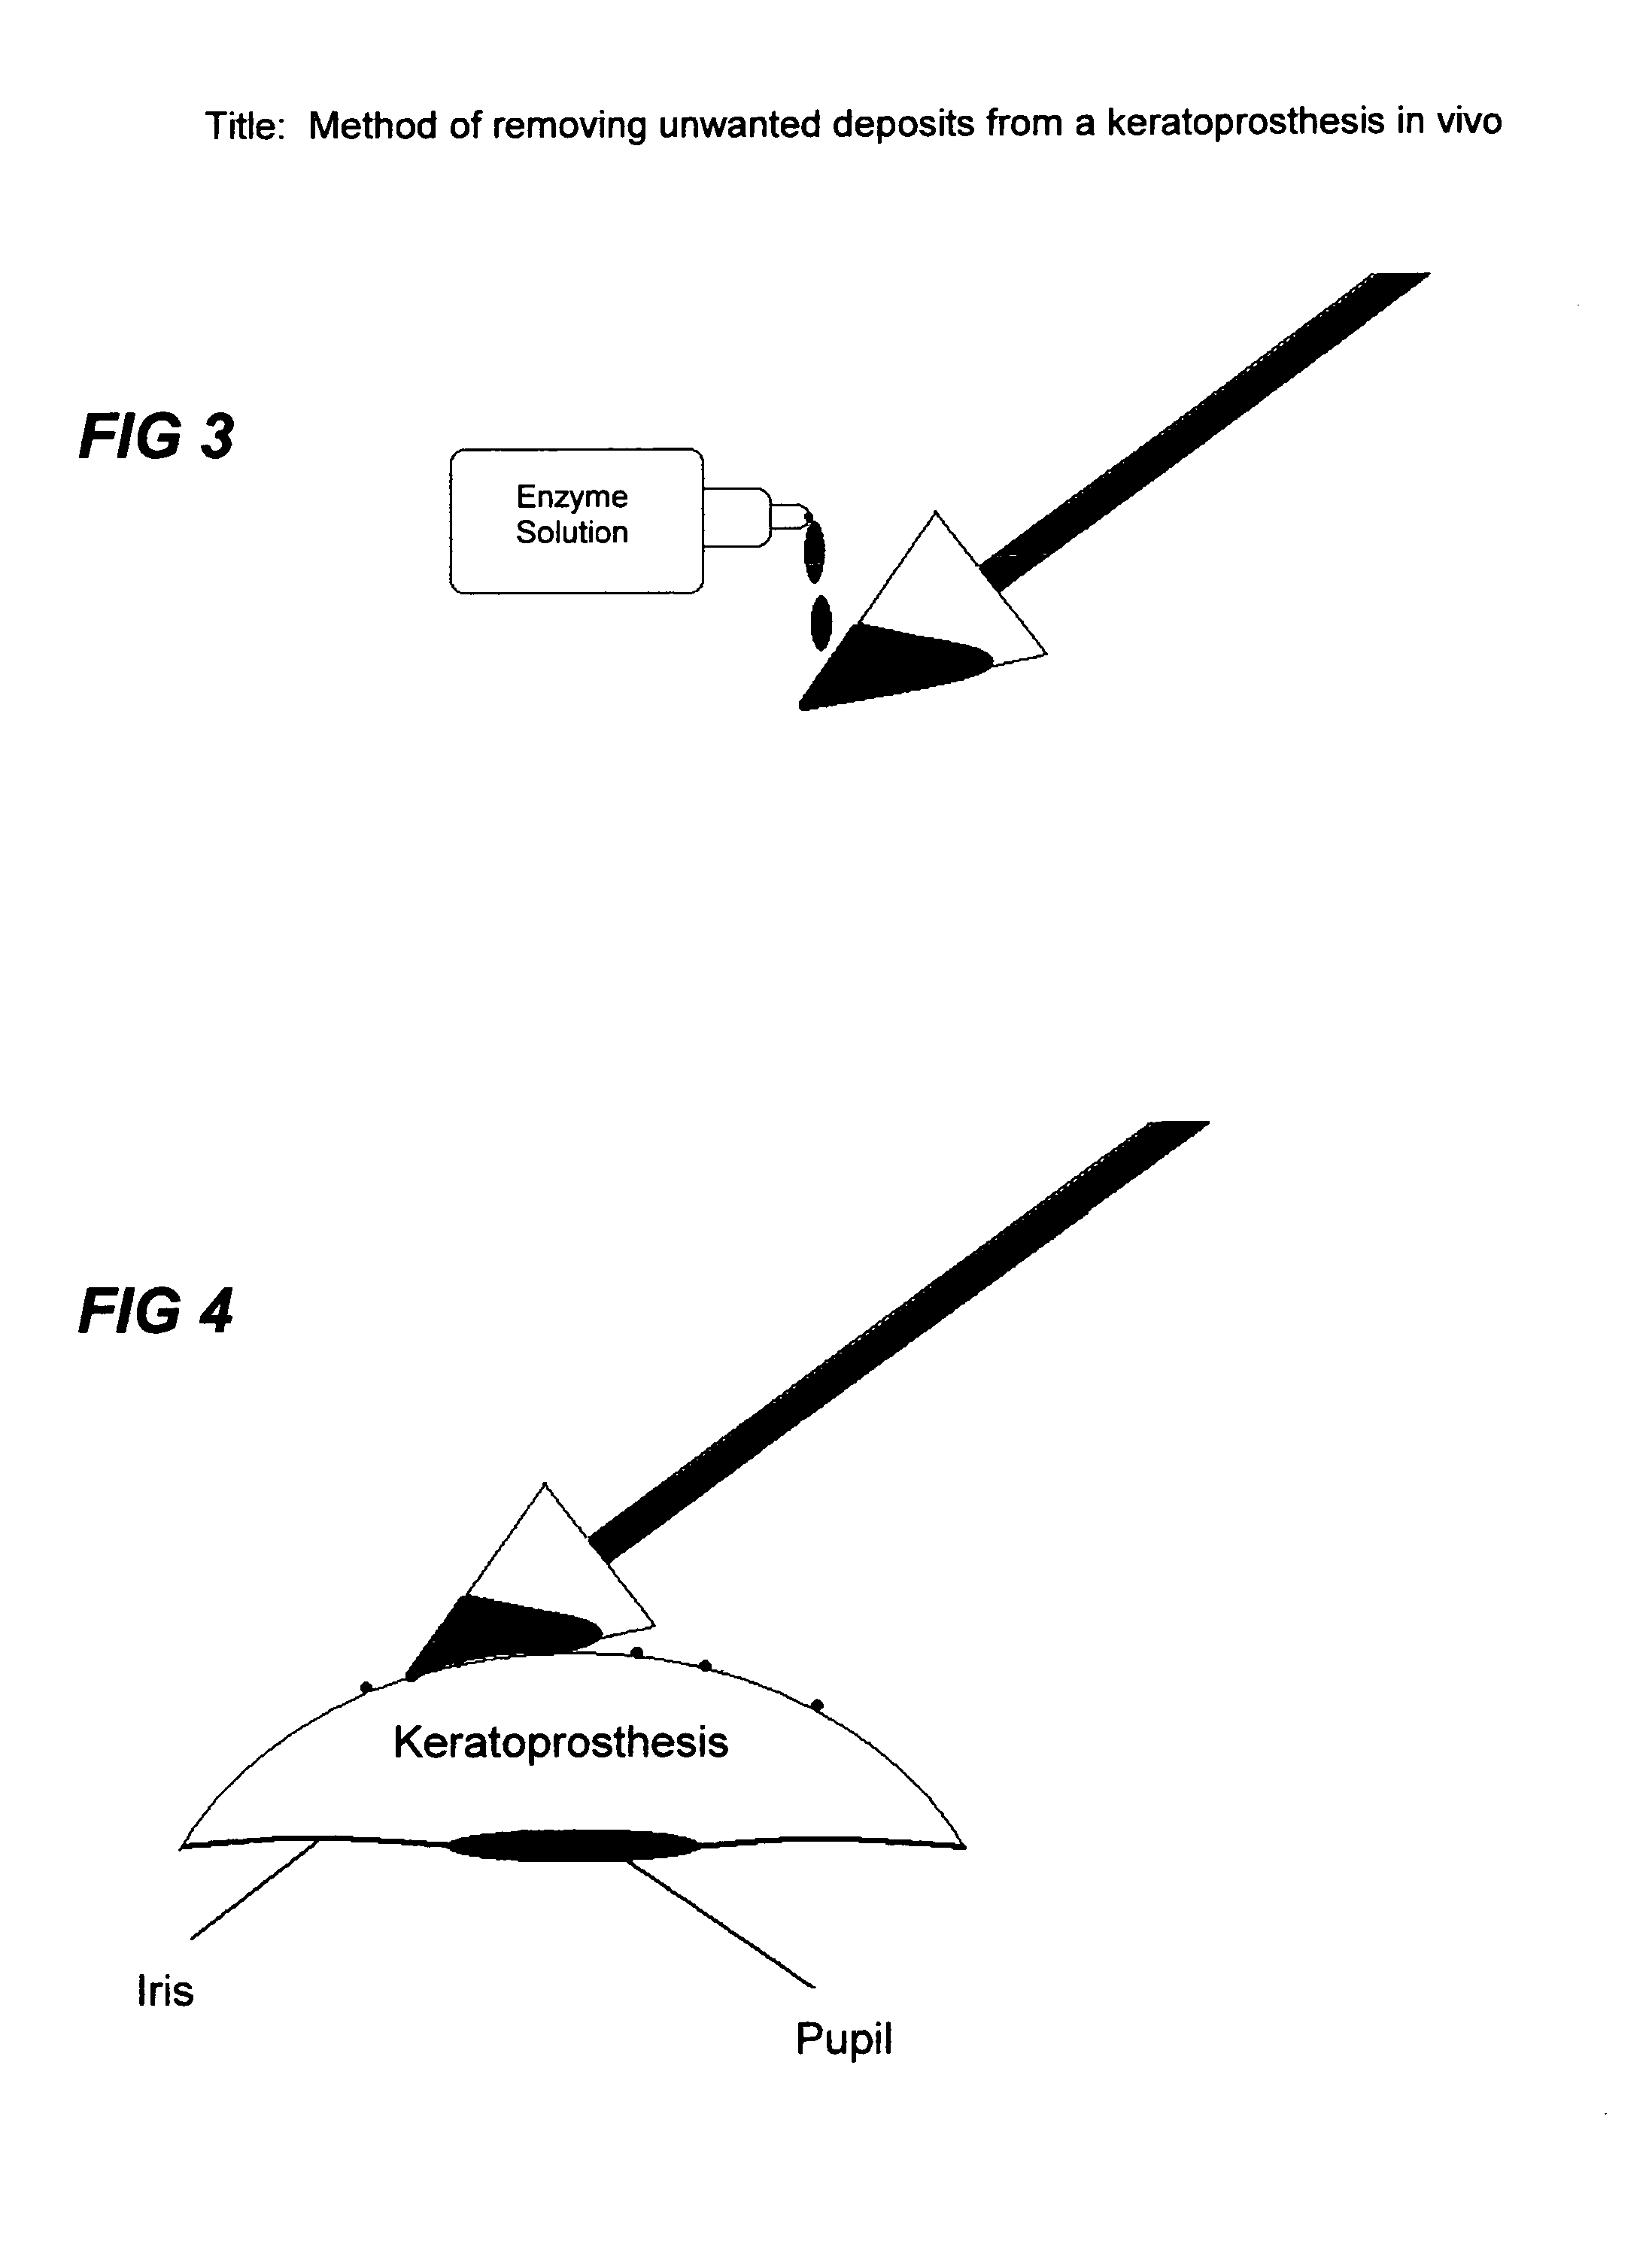 Method of removing unwanted deposits from a keratoprosthesis in vivo